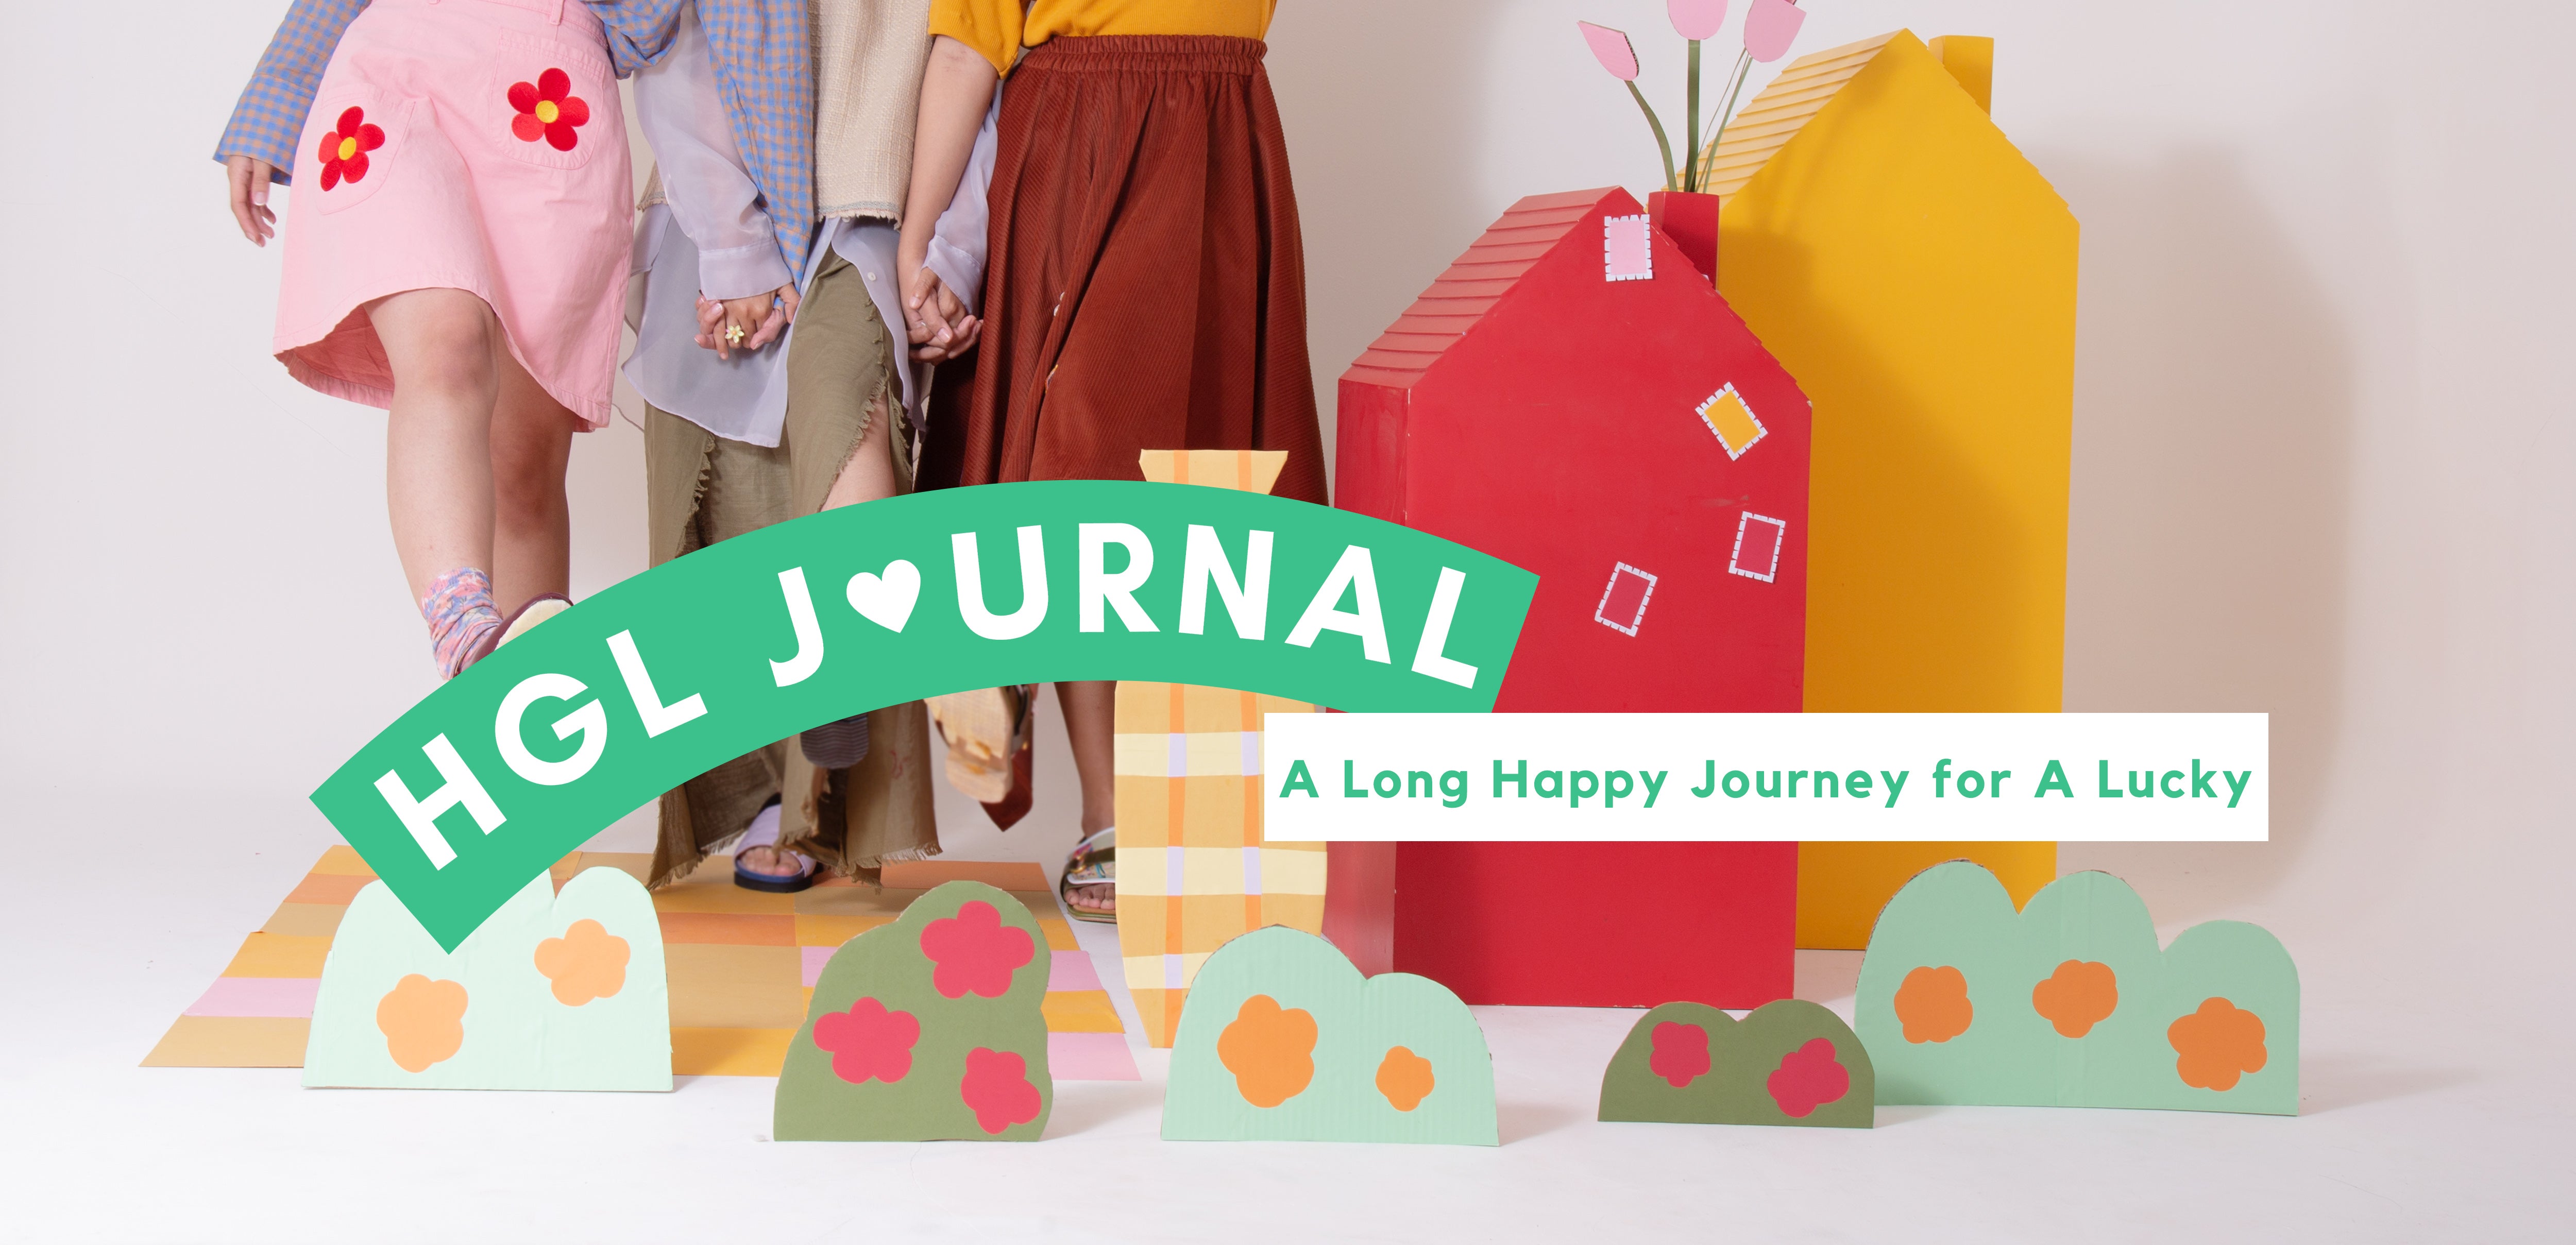 HGL Journal : A Long Happy Journey to a Lucky